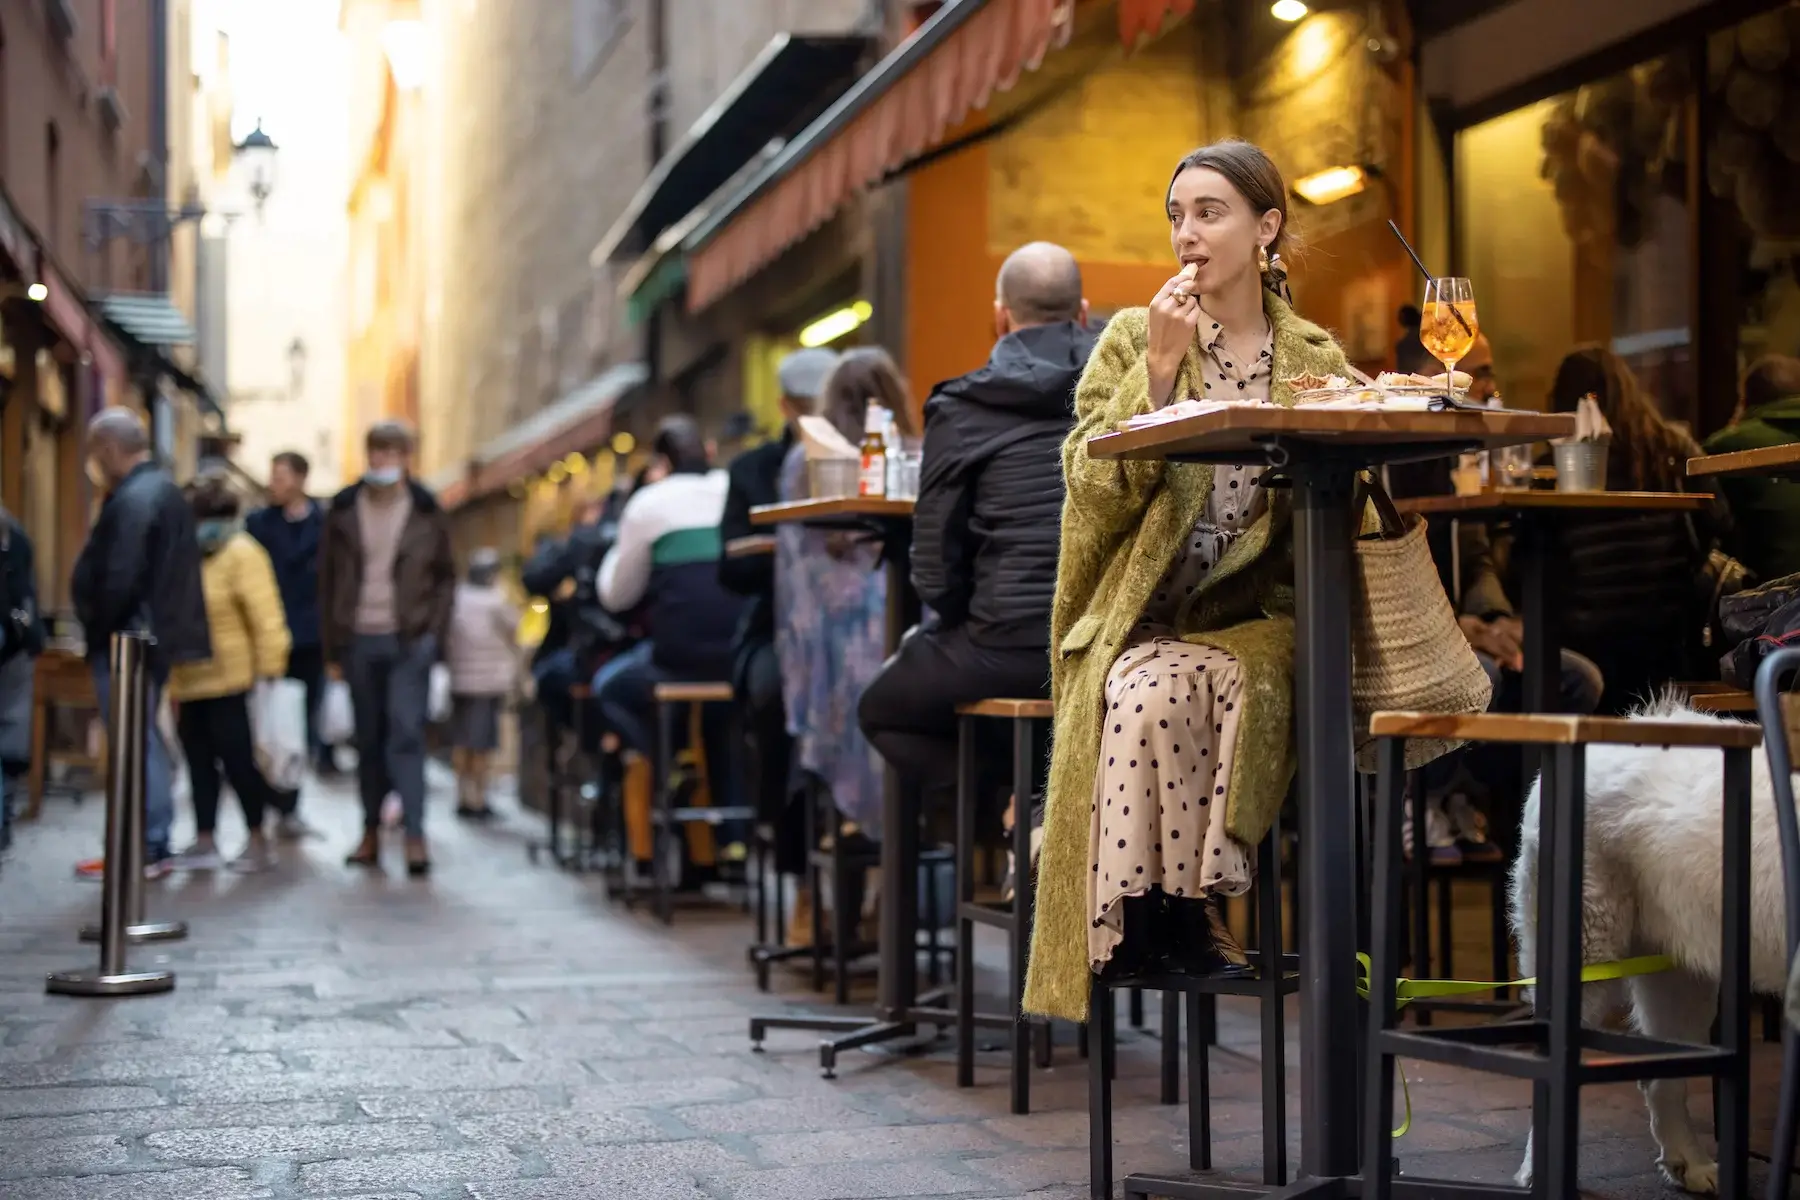 Woman sits alone with an Aperol Spritz at an outdoor bar on a narrow street in an Italian city